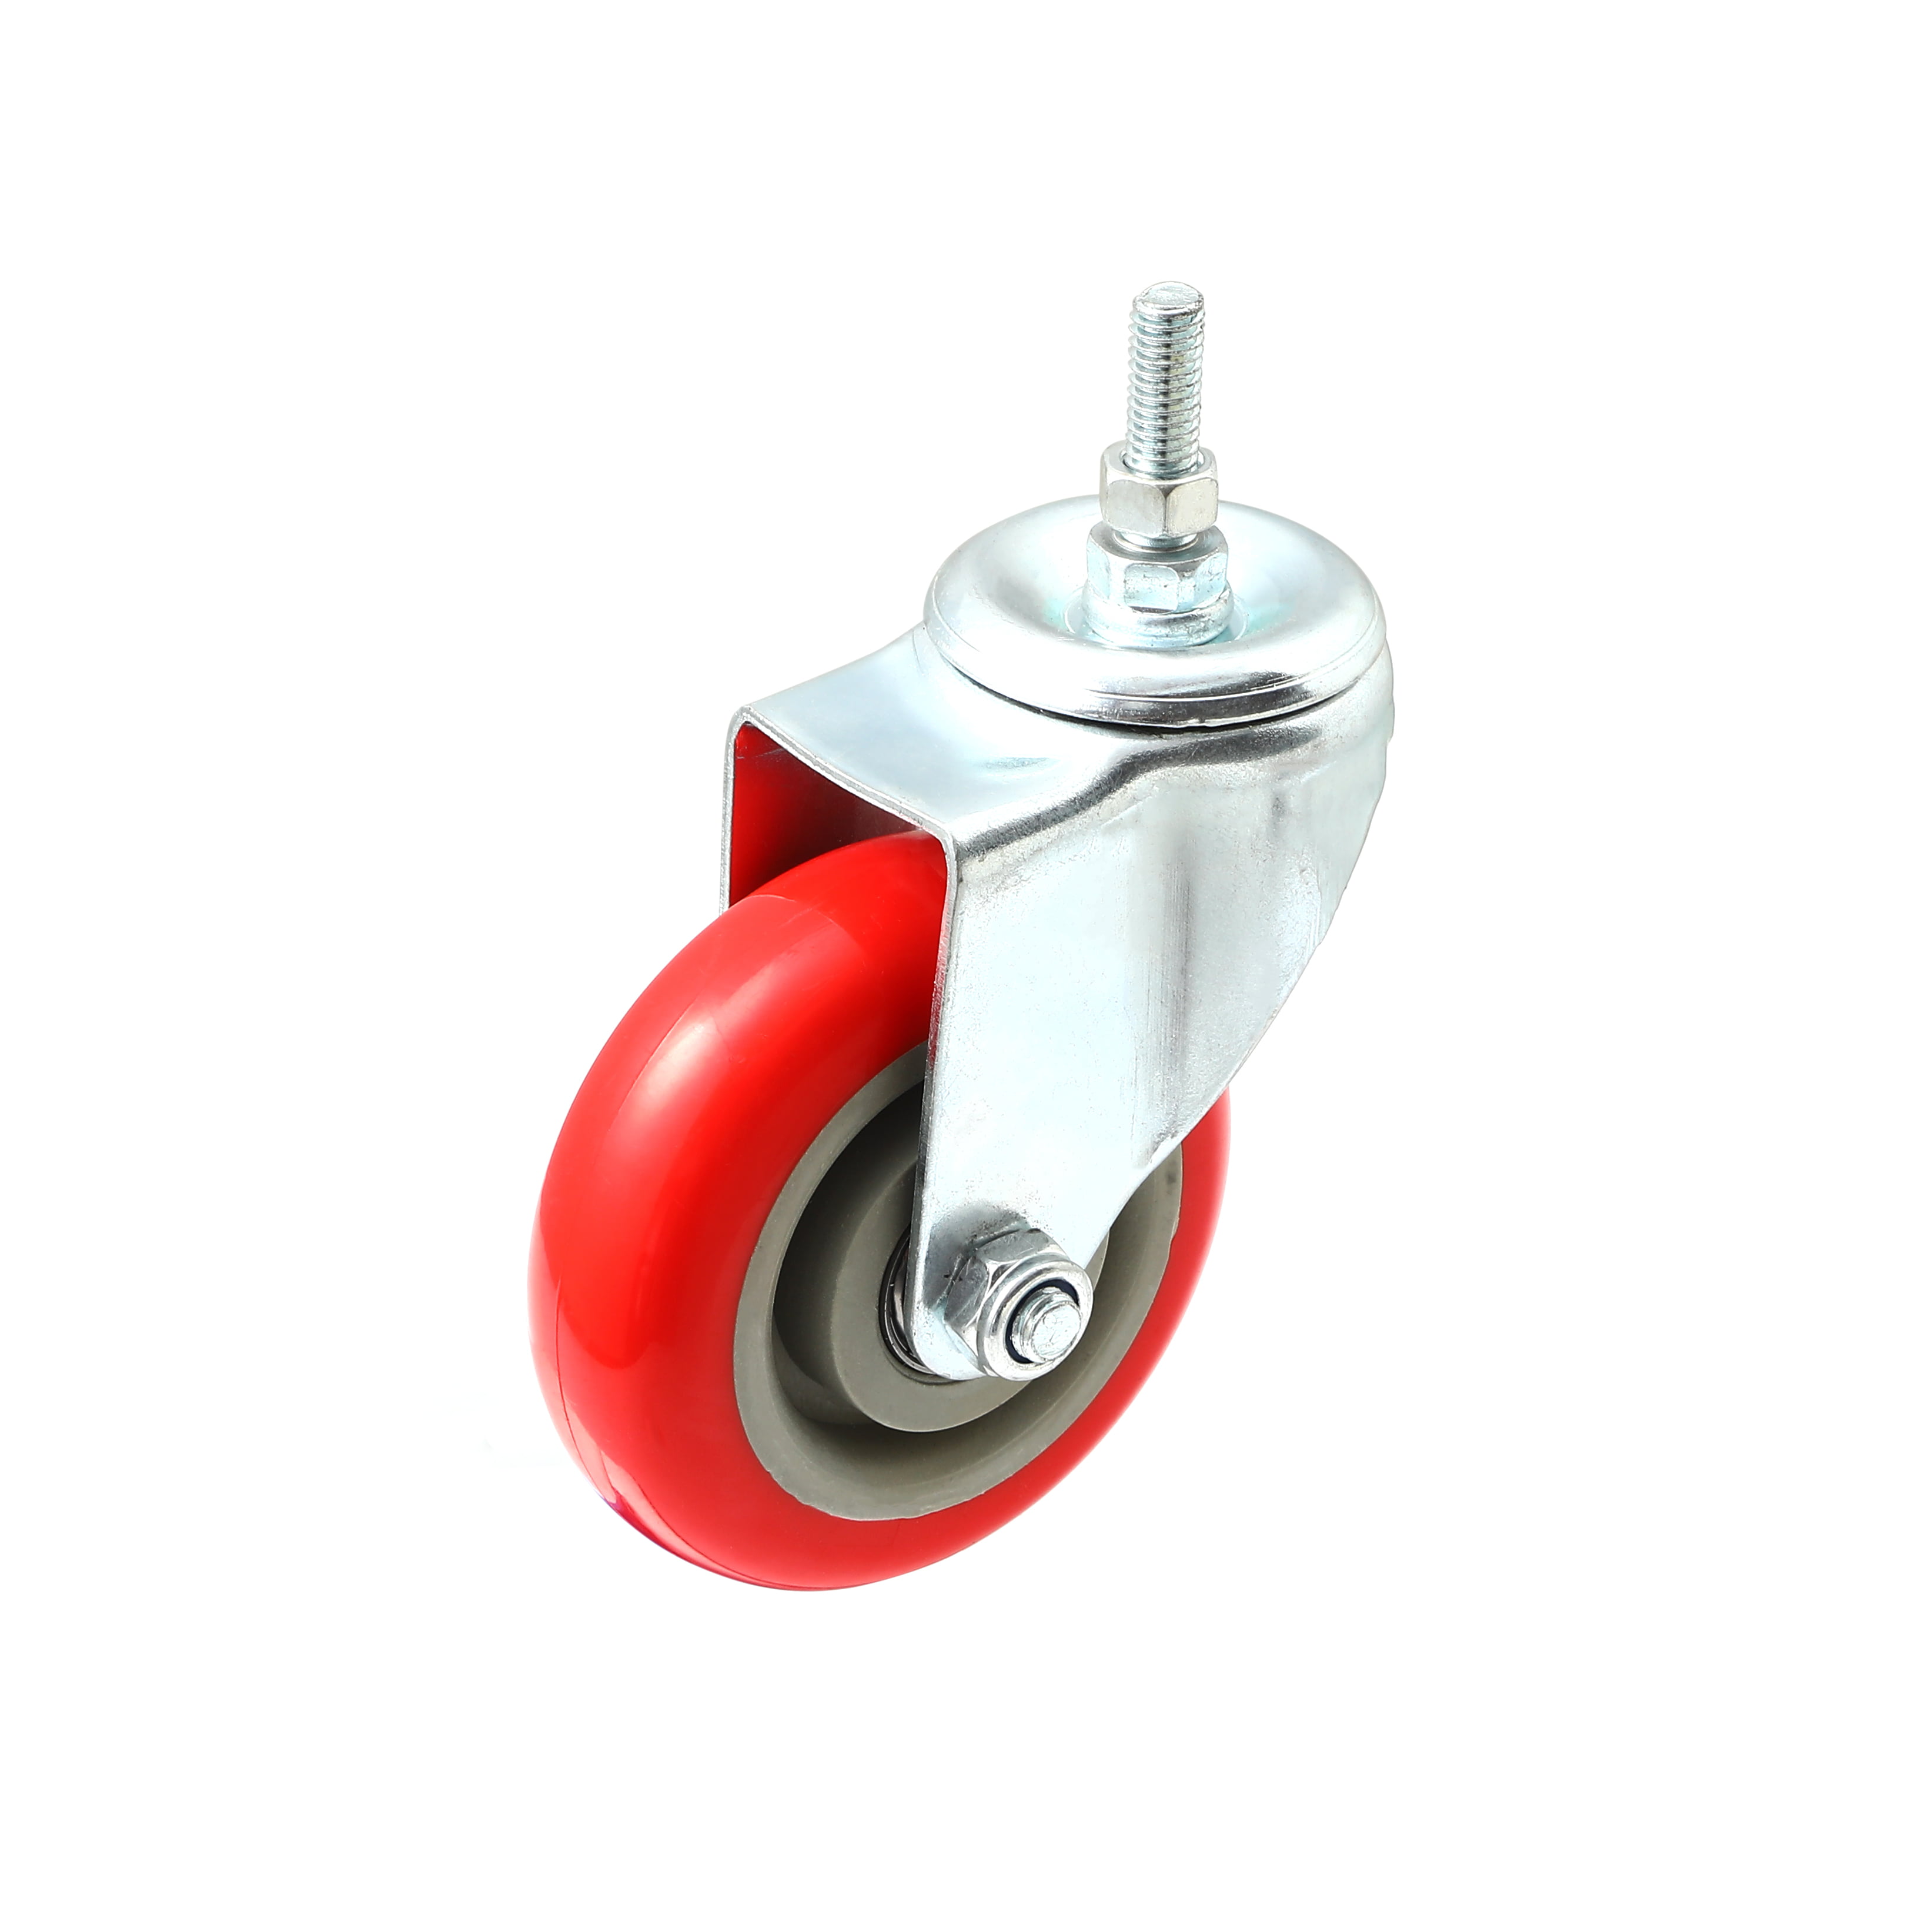 Hong xia shop 4 Rubber Casters 100 mm Heavy-Duty Swivel Casters Used to Move The Trolley Table 4 Furniture Casters with A Load of 400kg 2 Swivel Without Brake, 2 Swivel with Brakes